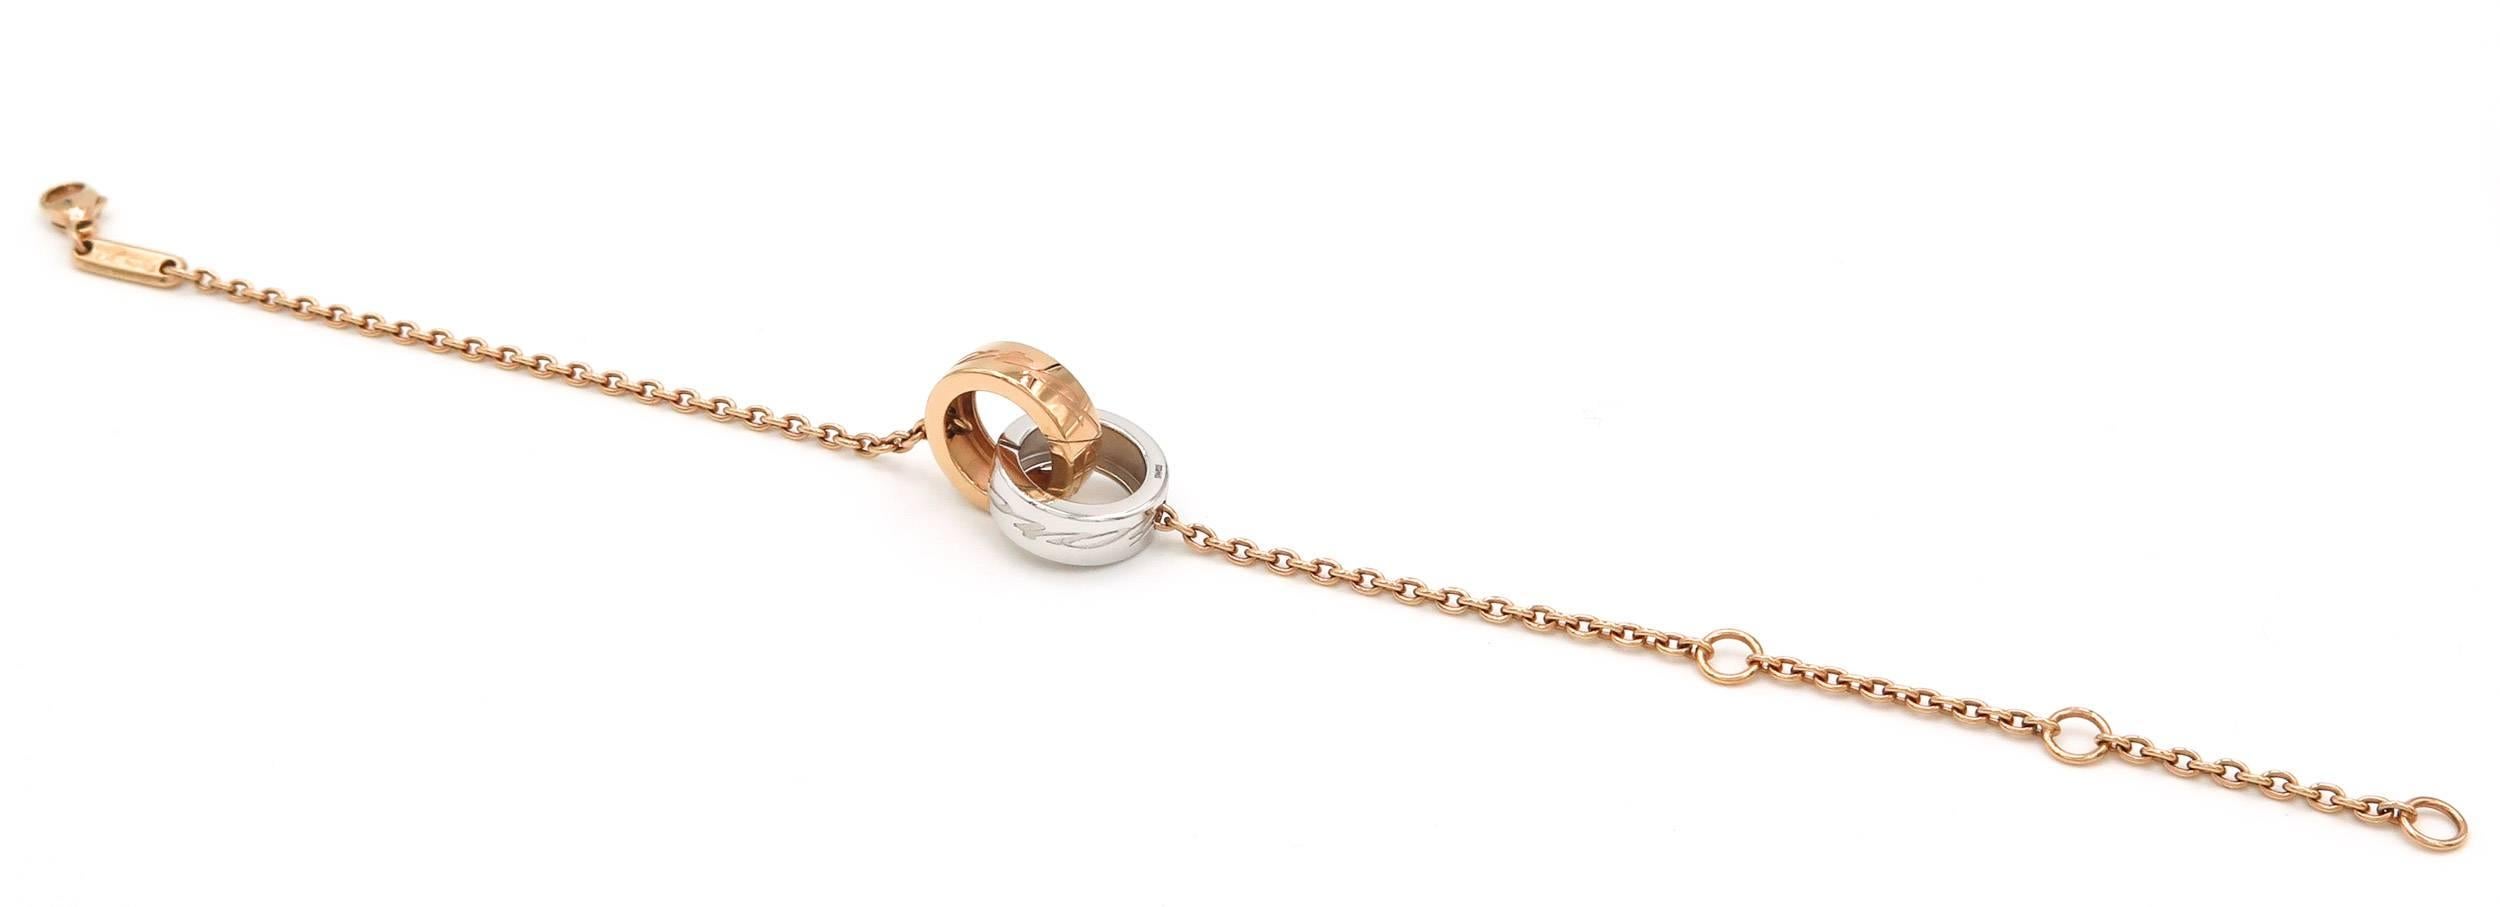 This exquisitely simple bracelet, adorned with a white gold and rose gold ring beautifully crafted and timeless expression of architectural refinement.
 The Chopardissimo bracelet is 7.5 inches long with options to wear at 6 and 6.75